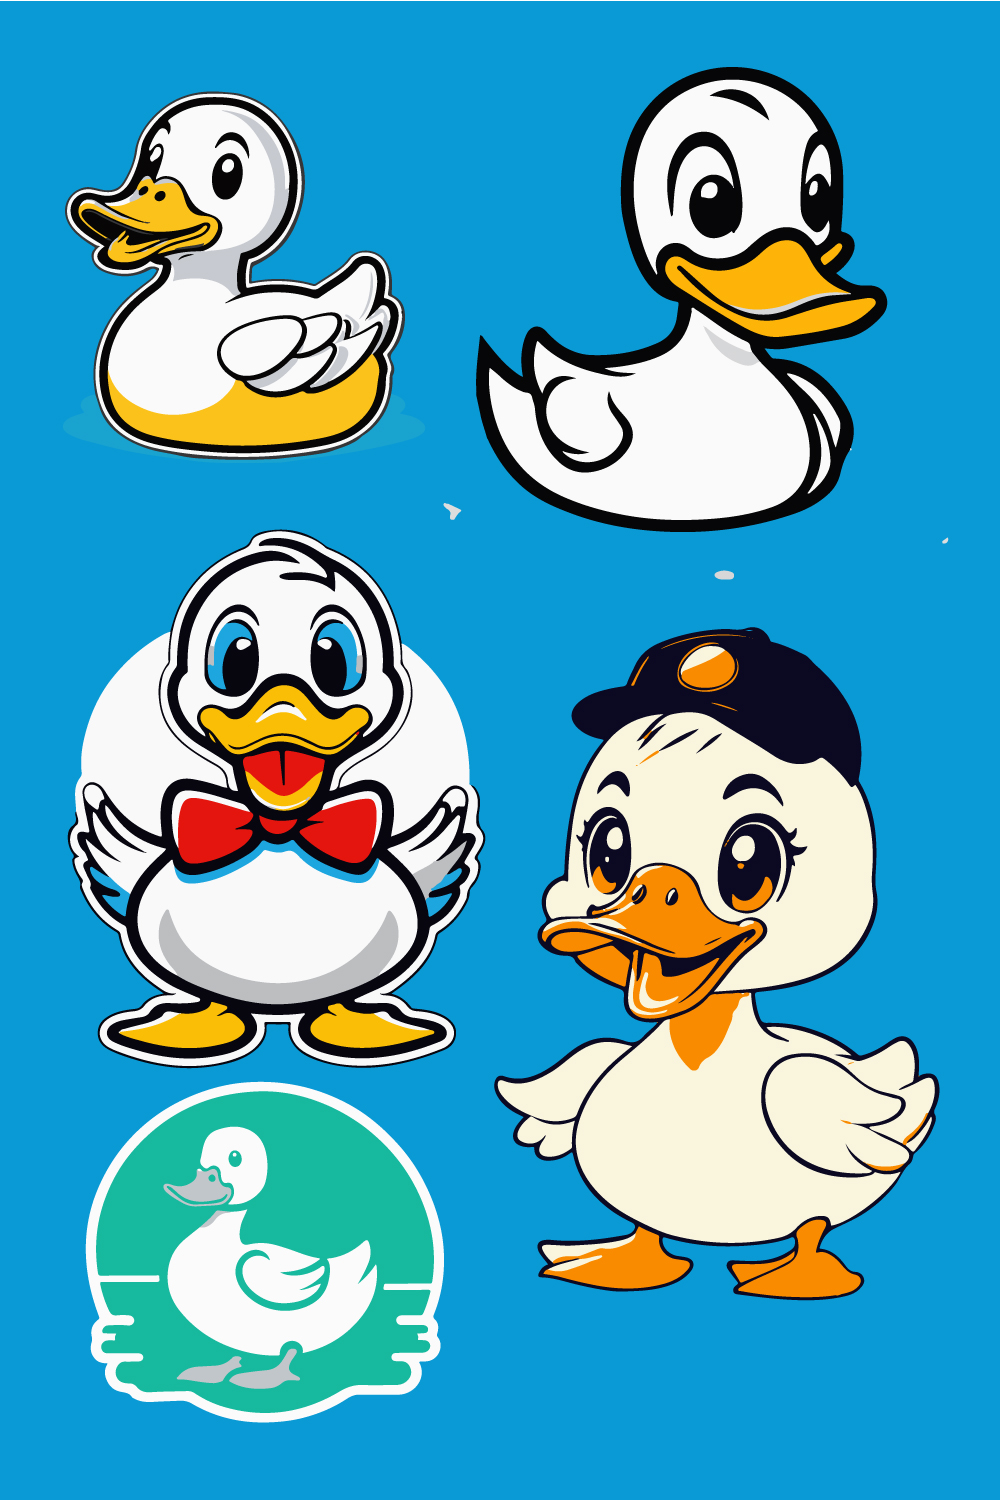 Cute adorable duck sticker and t-shirt design pinterest preview image.